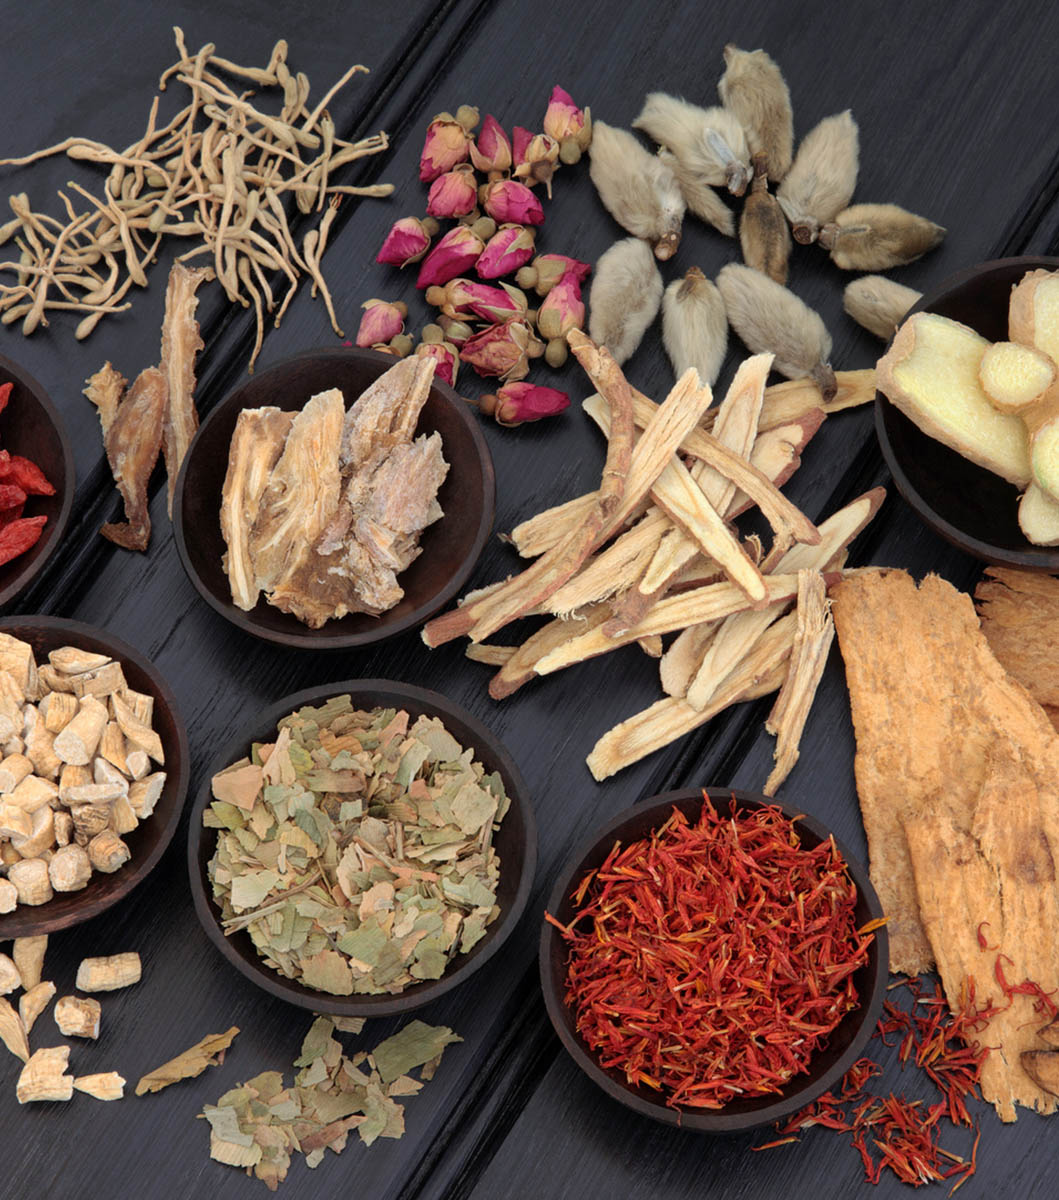 Chinese herbs in a TCM formula